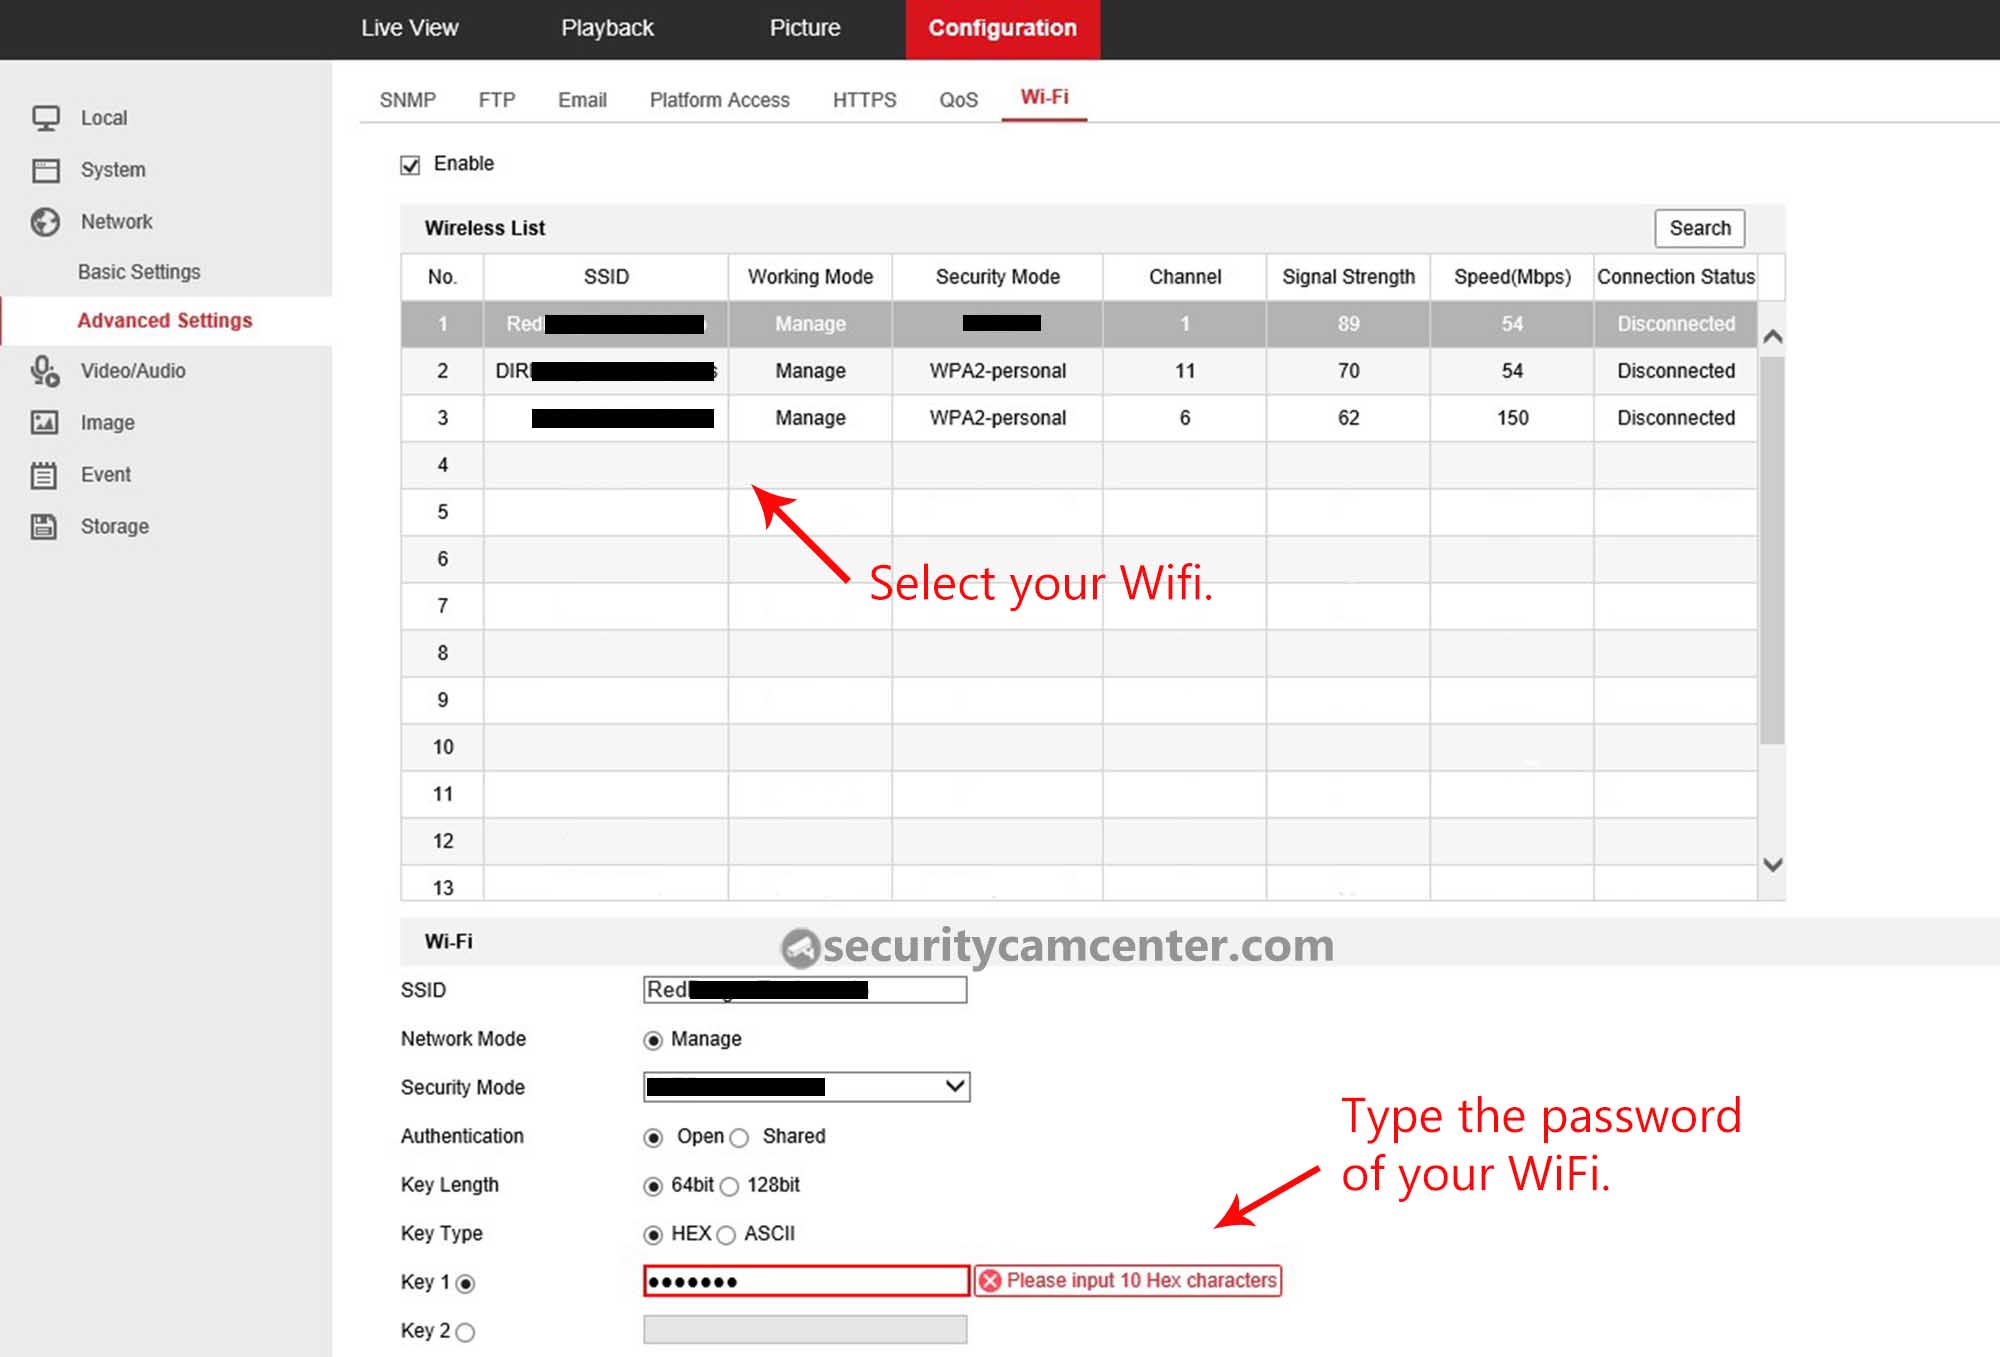 On the WiFi section you need to select your WiFi and enter the password.